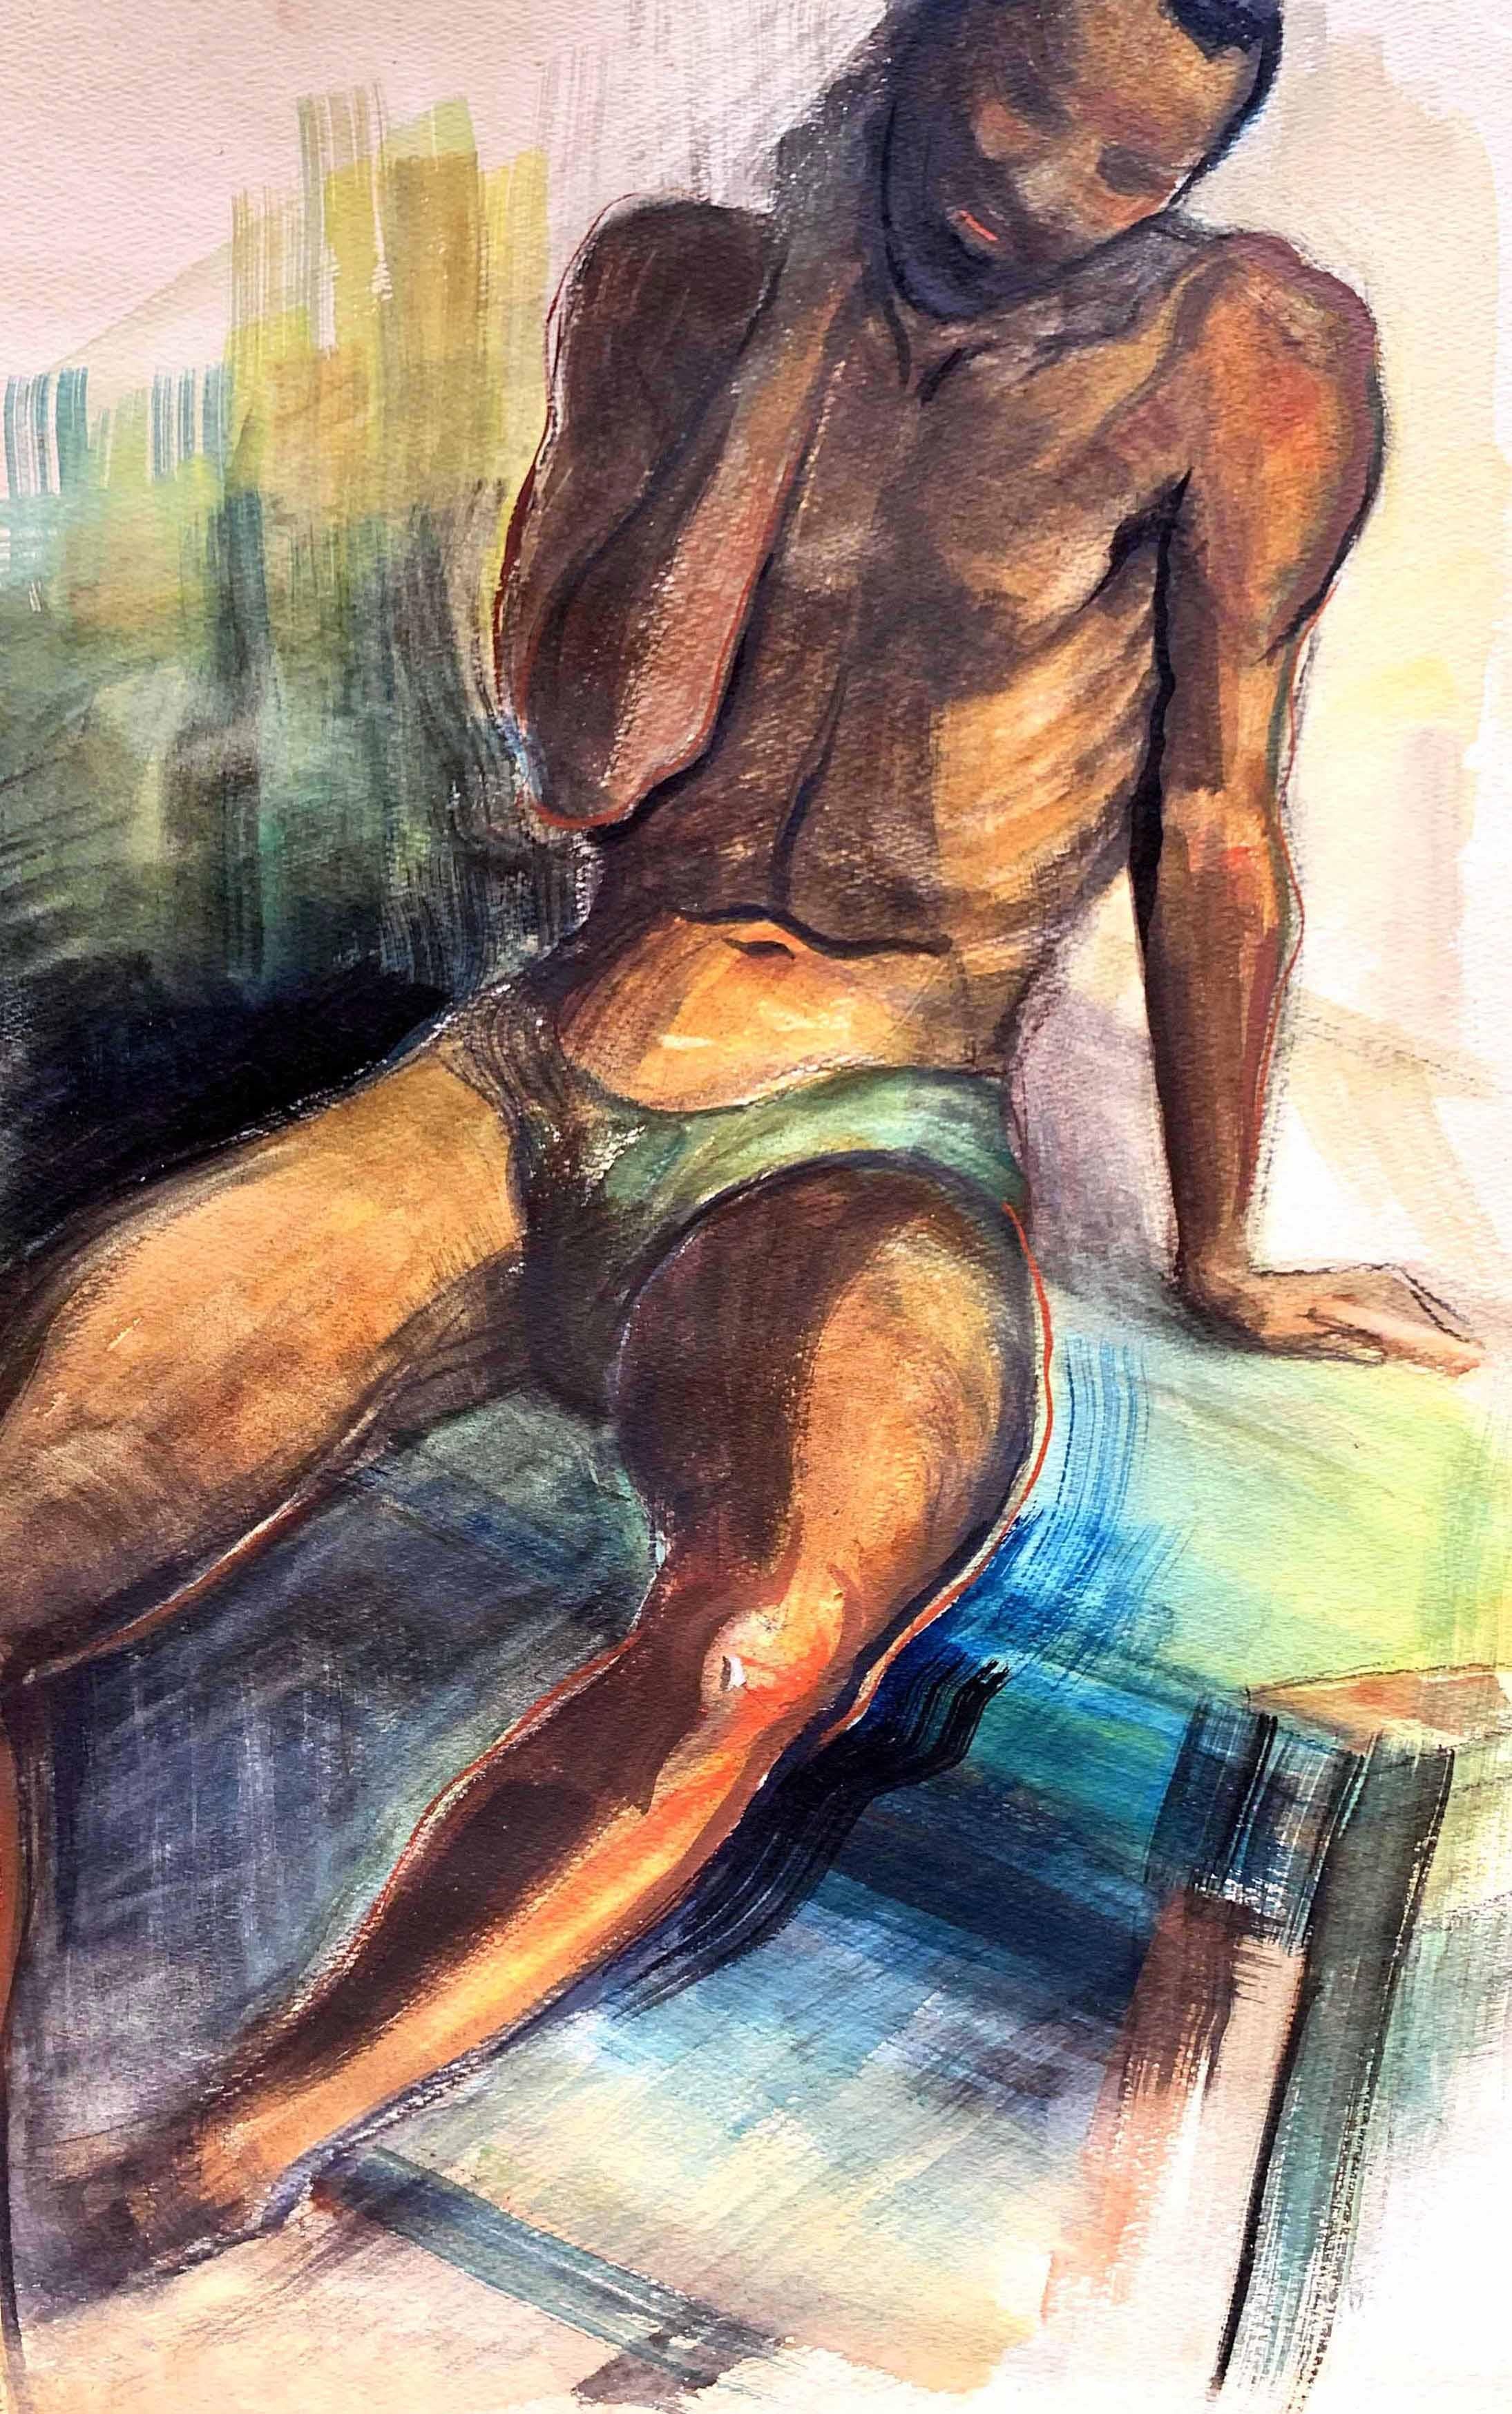 Strikingly executed in rich tones of brown and charcoal contrasting with brighter colors, this watercolor depiction of a seated African American man, with one arm raised to his neck, is beautiful and evocative. The figure's skin tones are captured